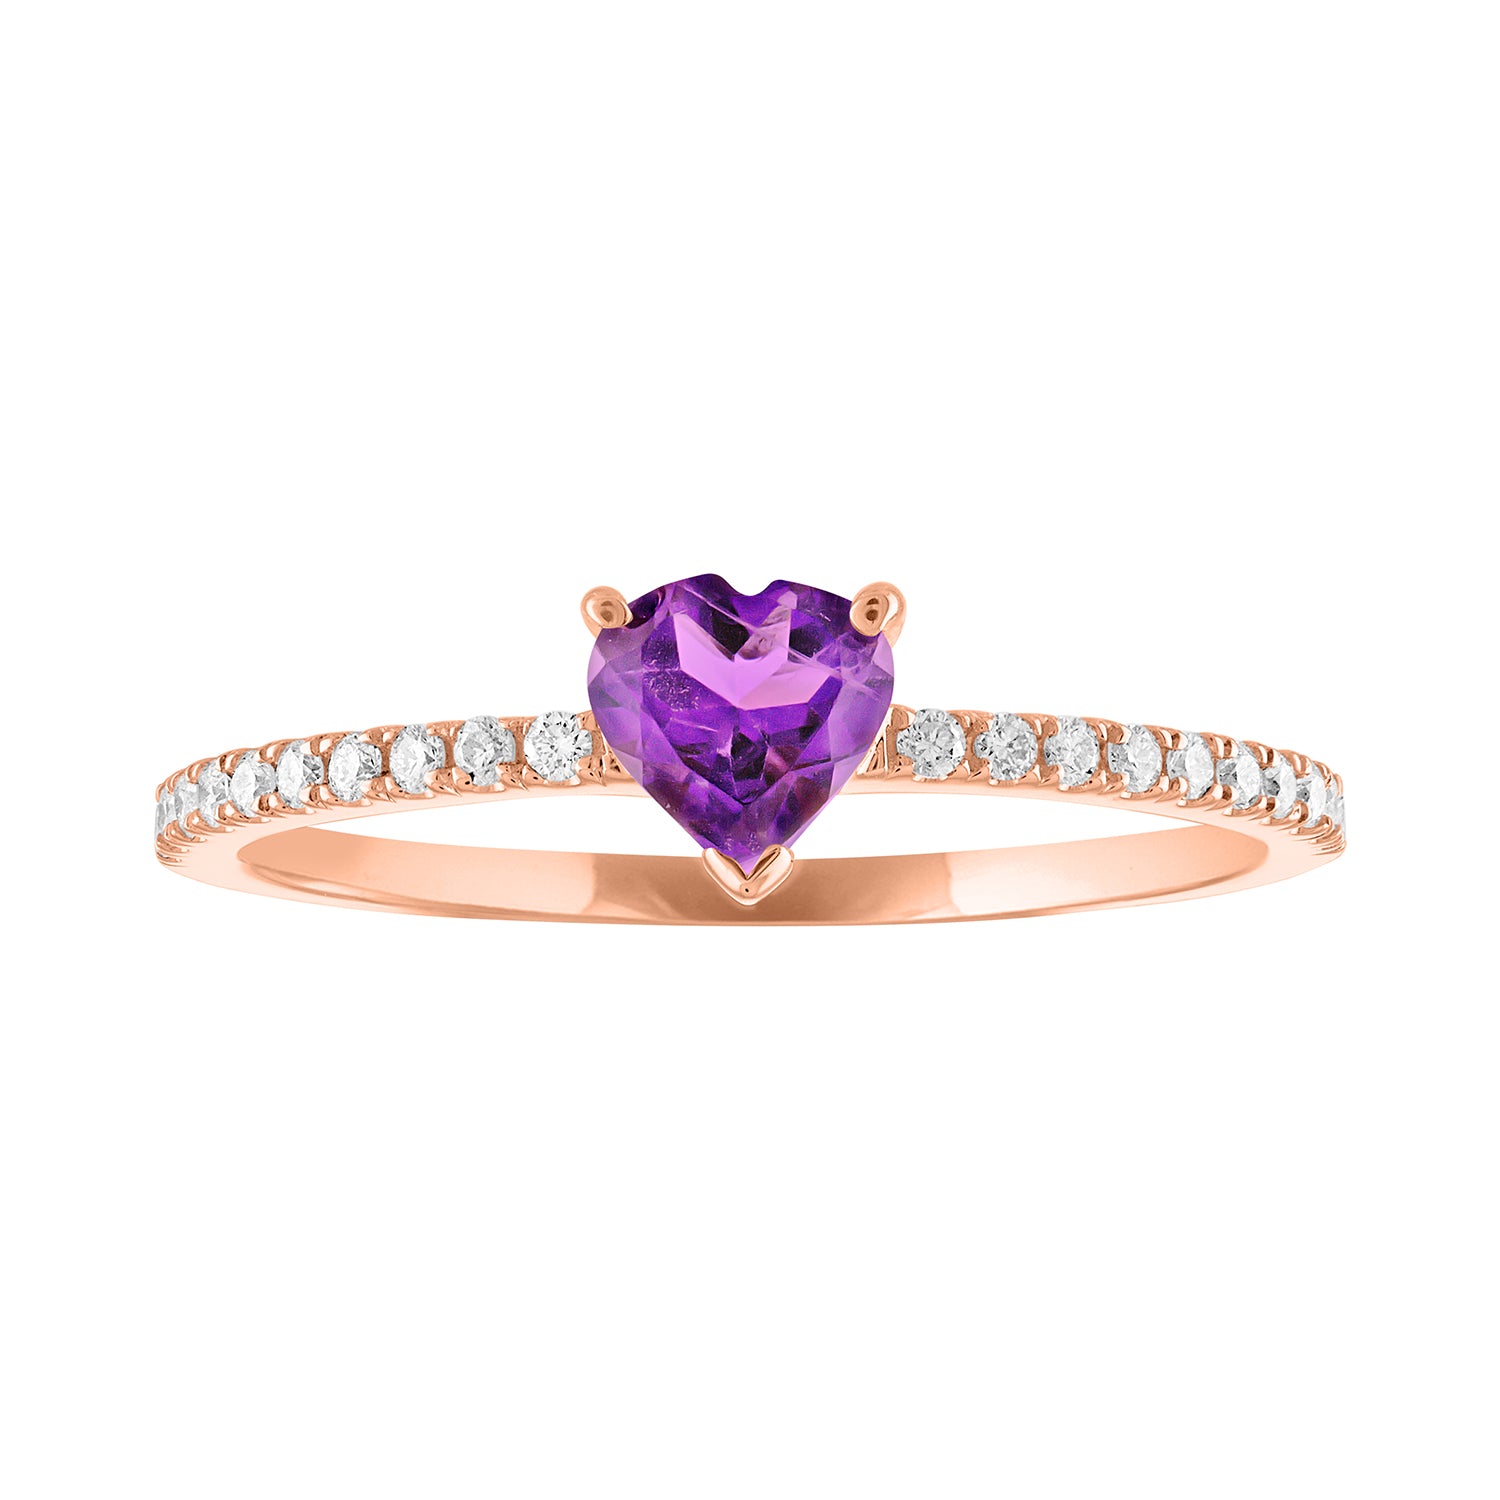 Thin banned rose gold ring with heart shaped amethyst and round diamonds on the shank